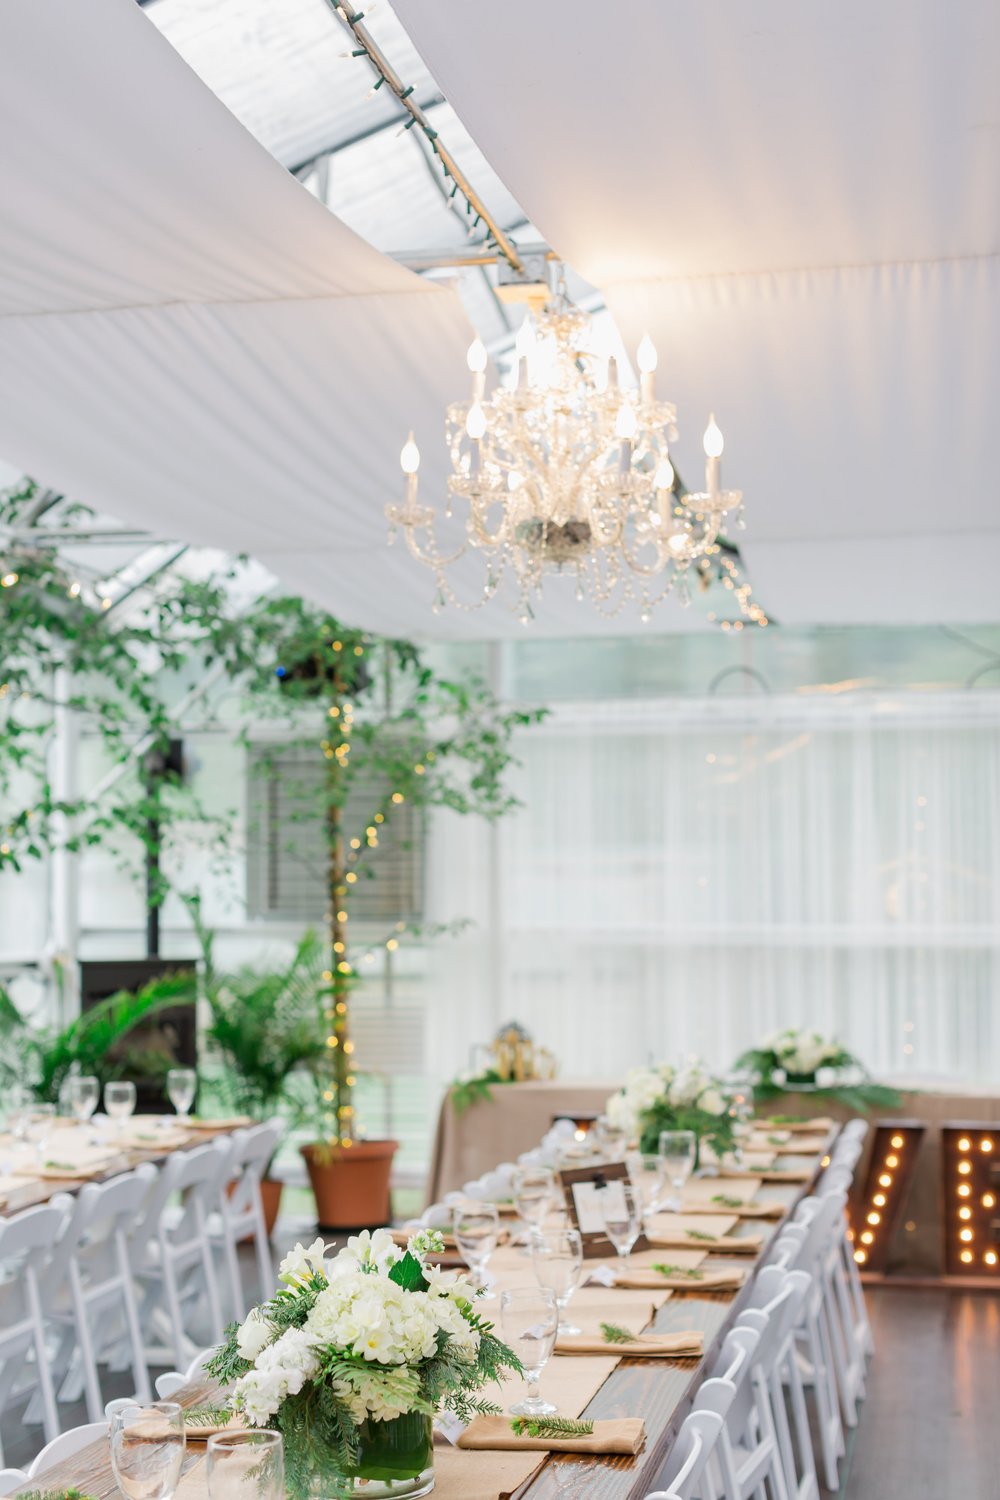  A table is set for a wedding reception in a green house. White fabric is draping the walls and ceiling. 